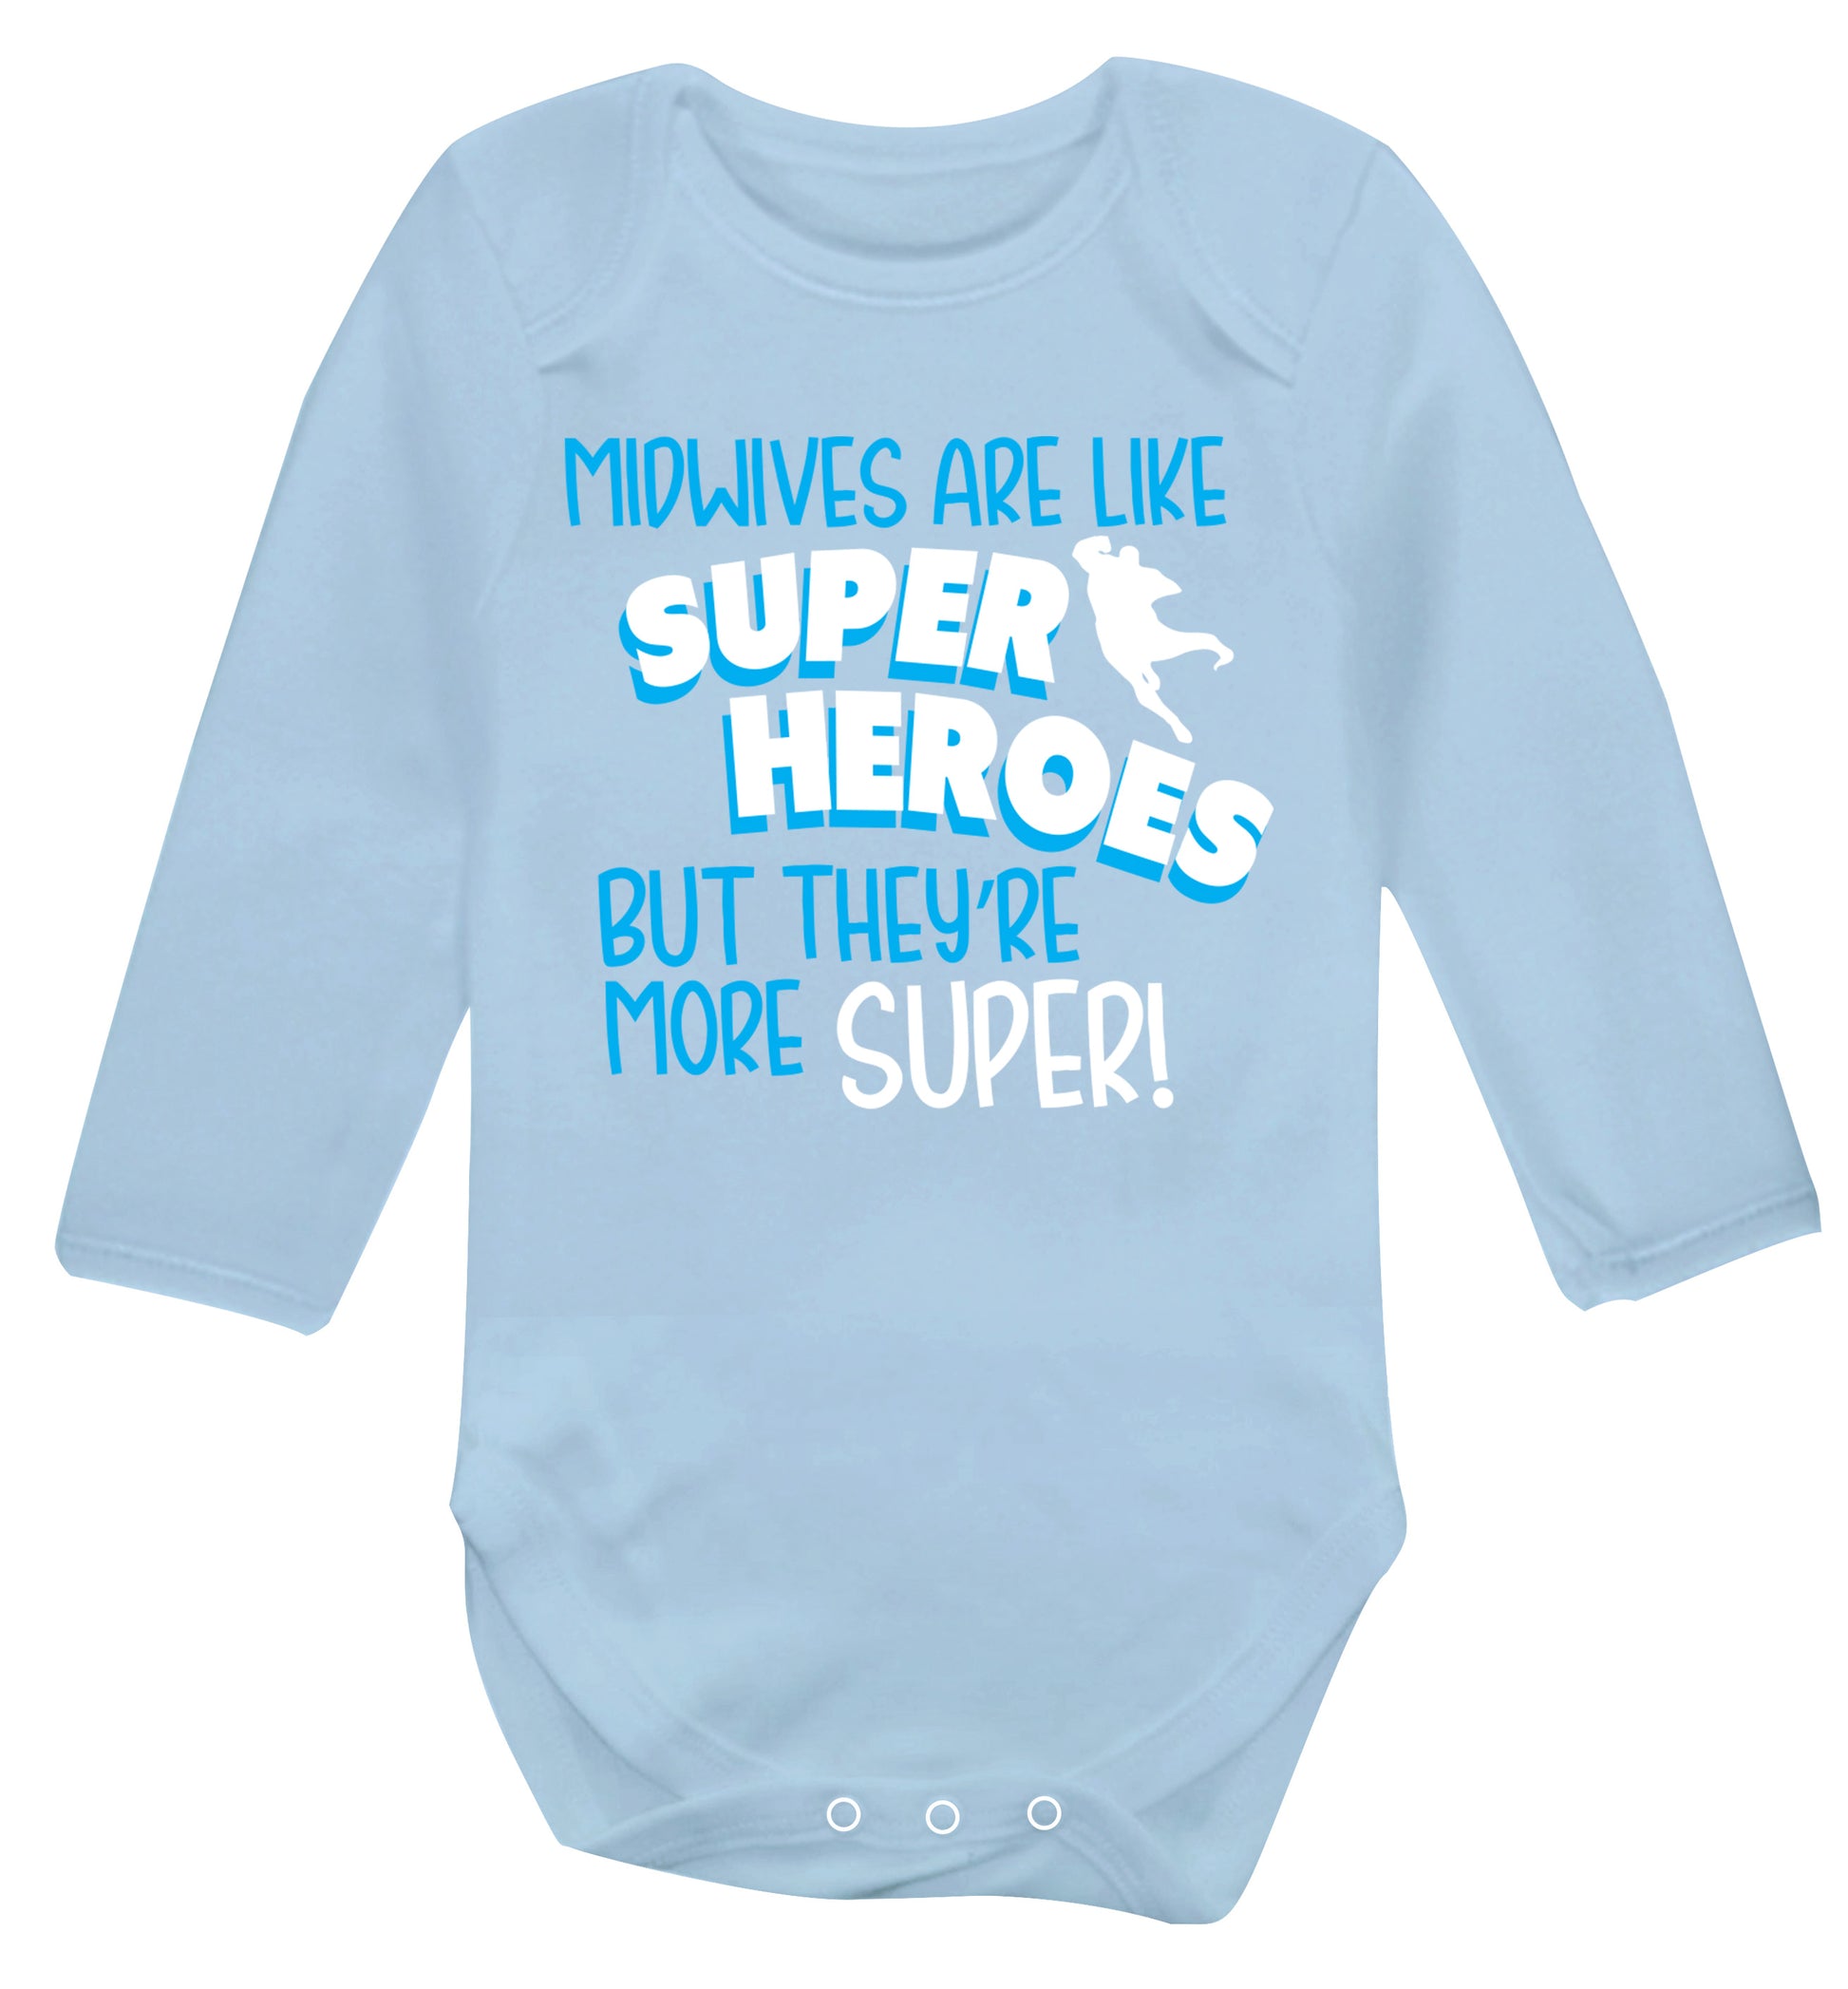 Midwives are like superheros but they're more super Baby Vest long sleeved pale blue 6-12 months